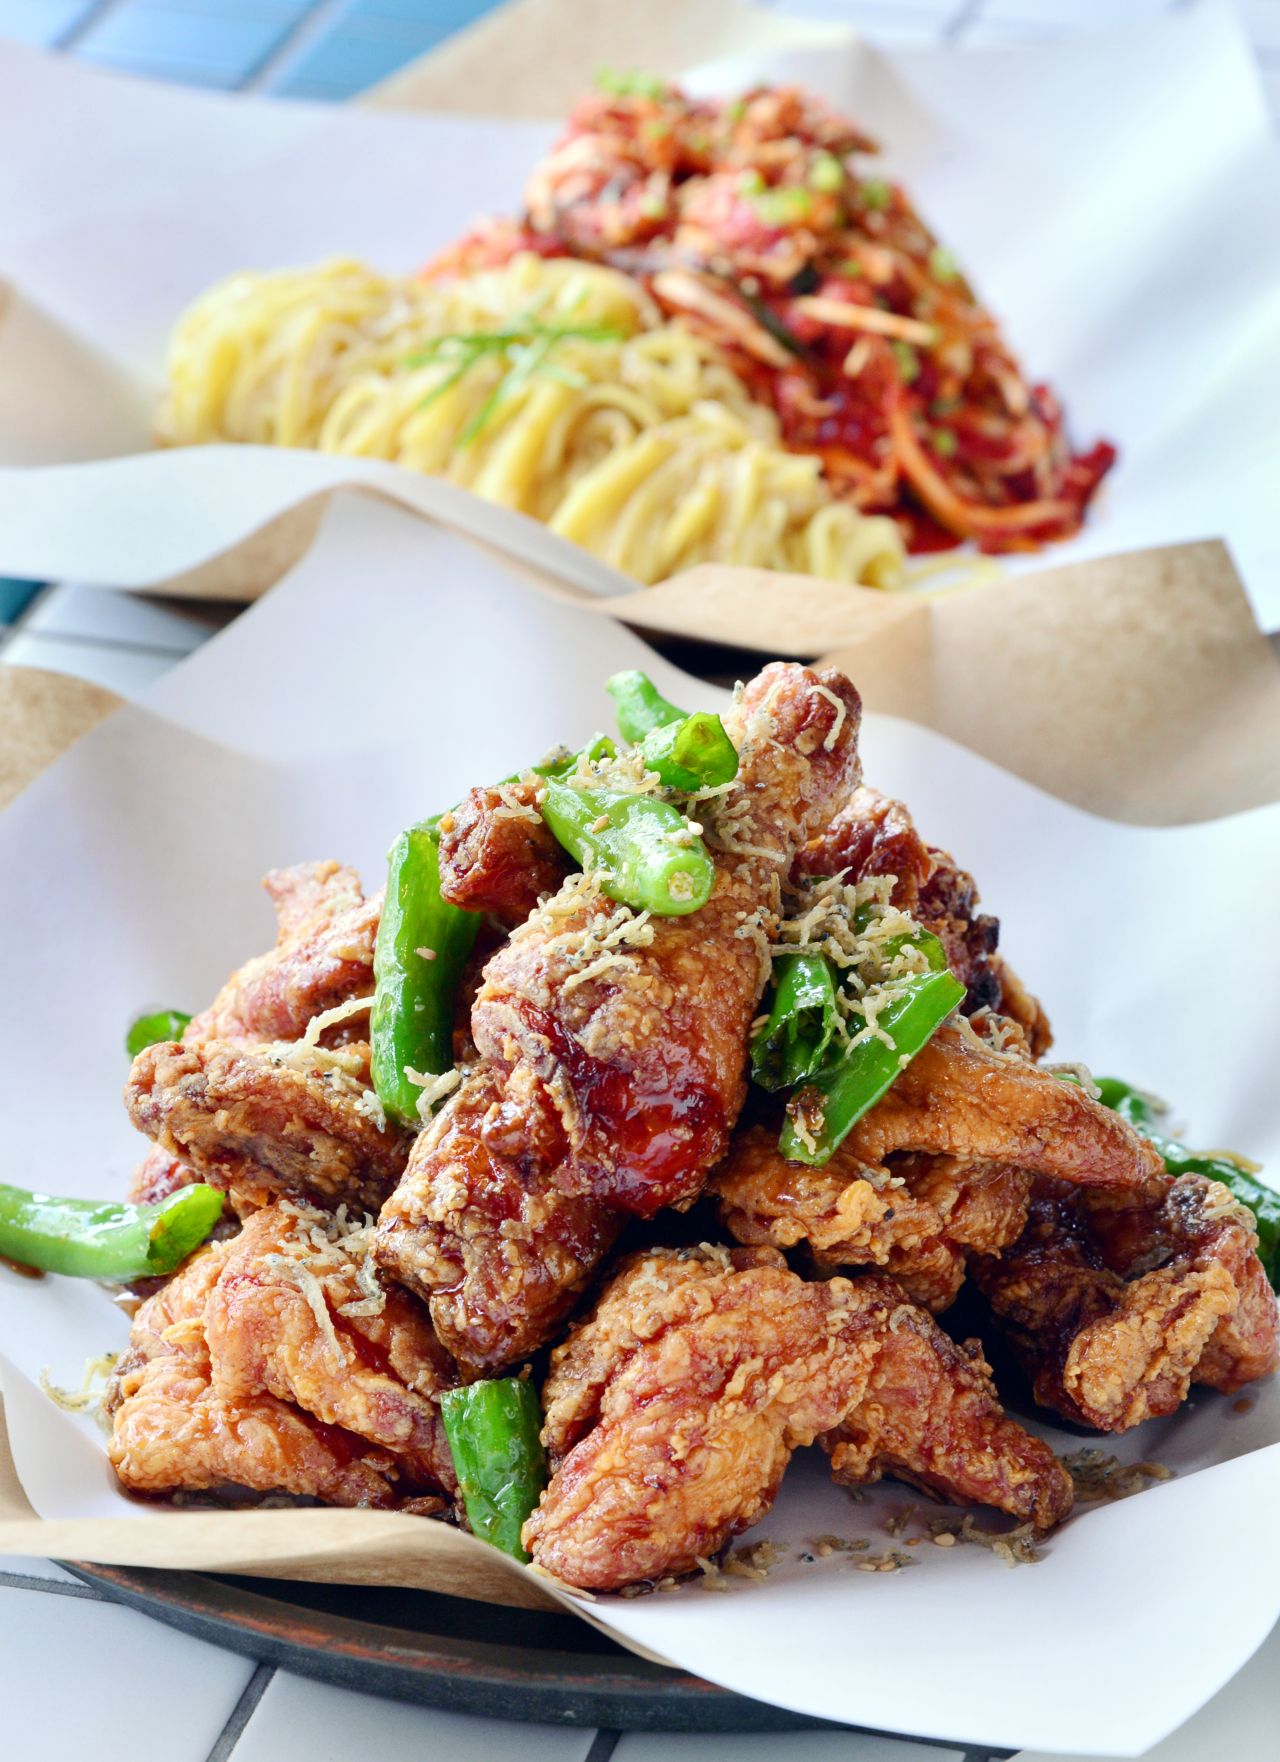 1) Hyodo’s chewy spicy noodles with dried pollack (back) acts as the perfect foil to crisp, piping hot chicken, including Hyodo’s popular soy sauce-based chicken (front). (Photo credit: Park Hyun-koo/The Korea Herald) 